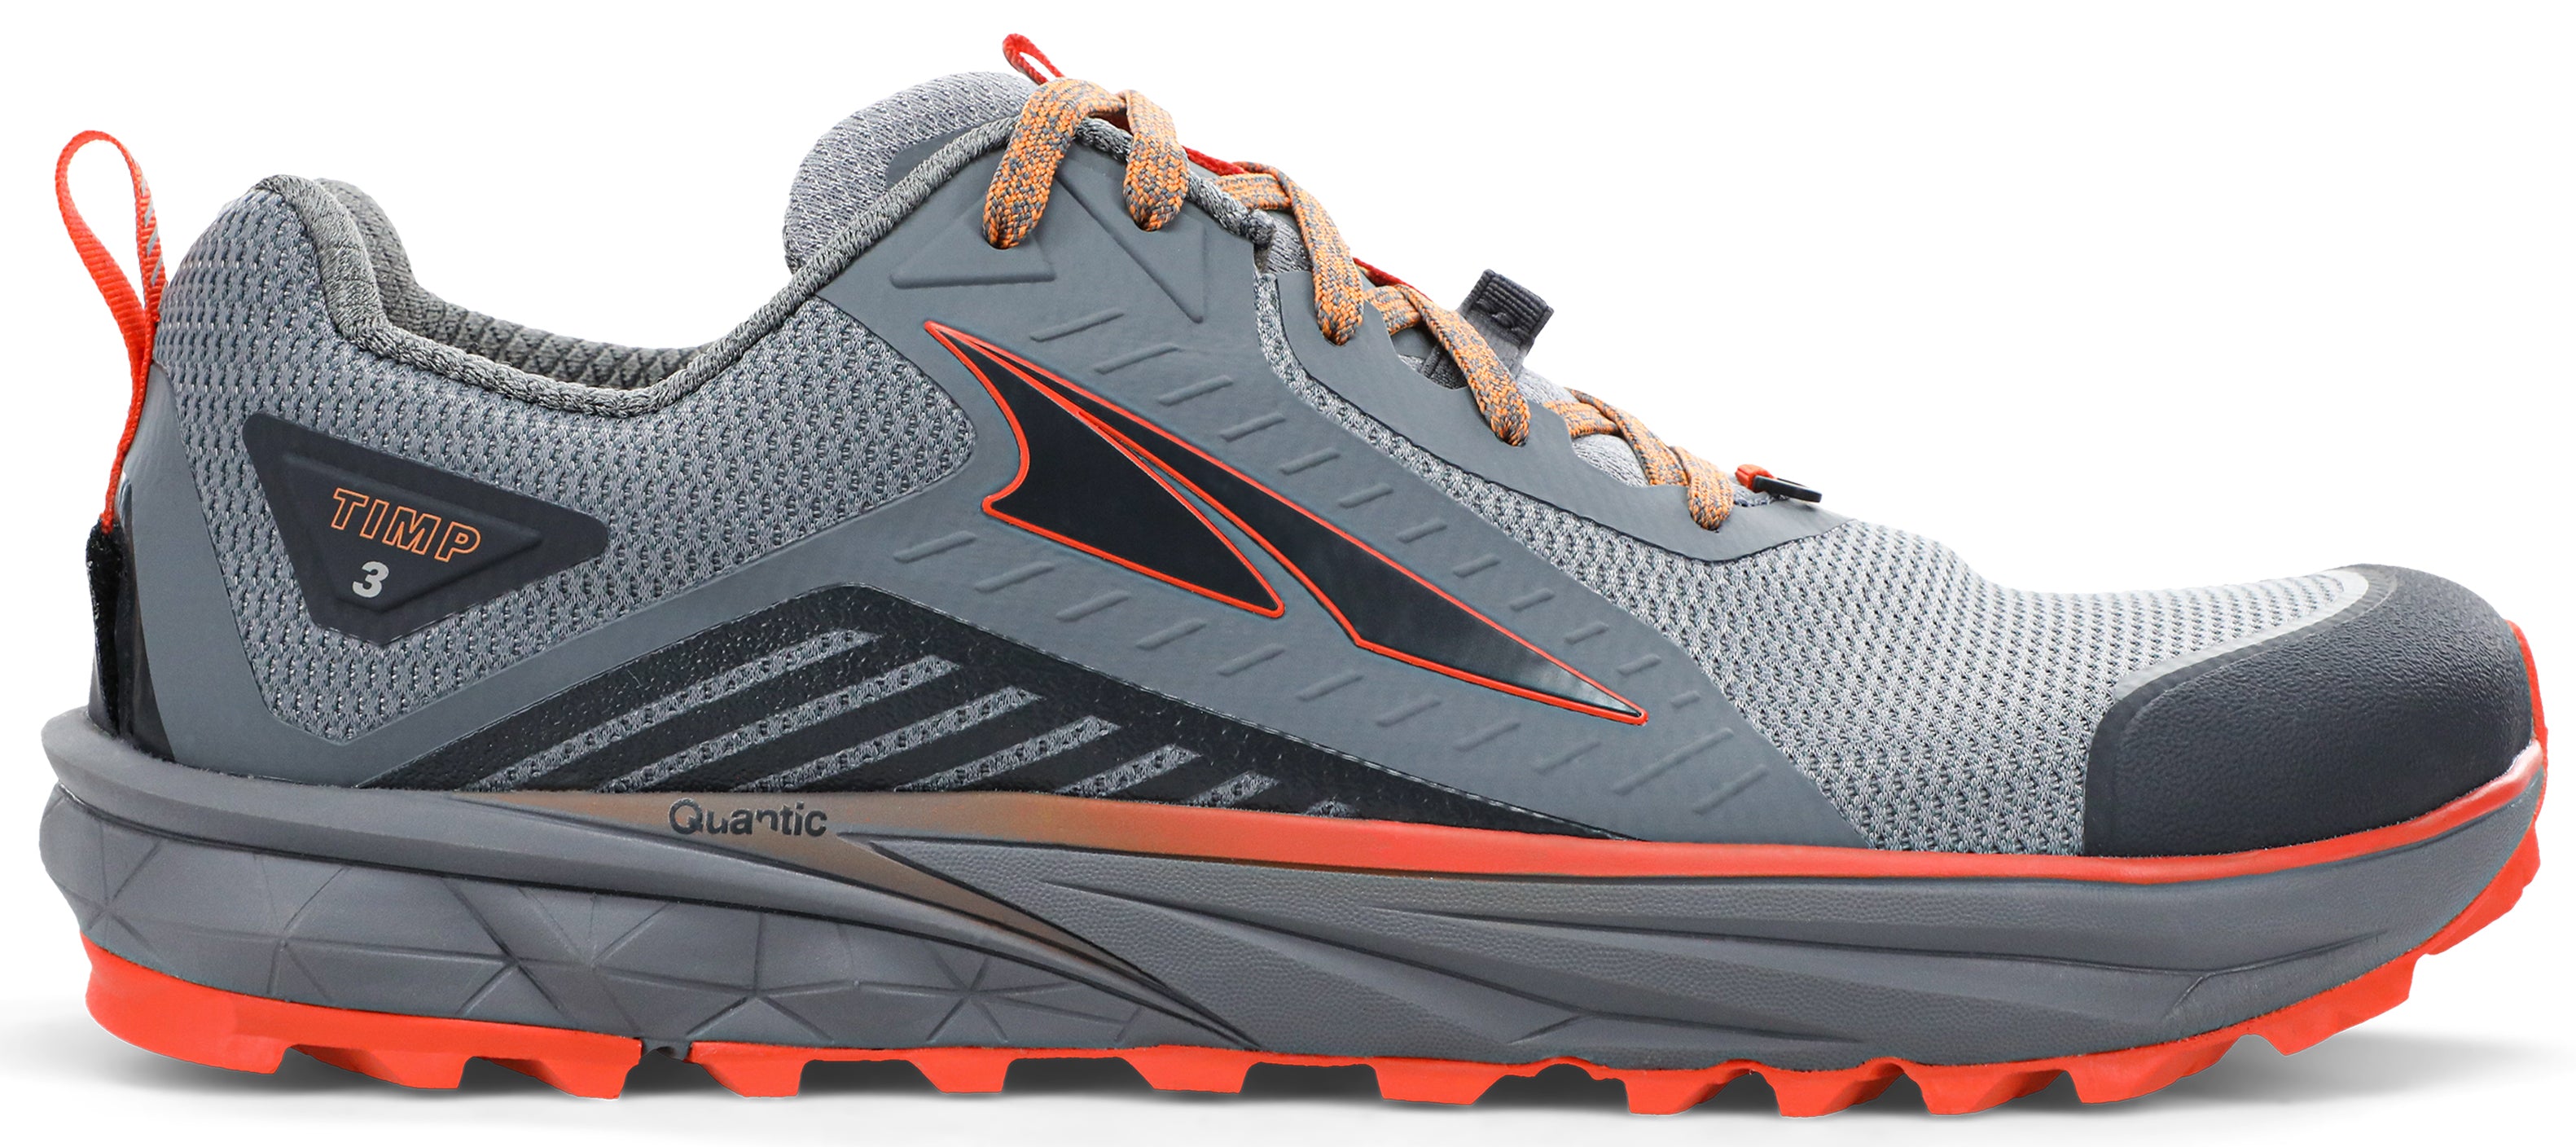 Men's Altra Timp 3 Trail Running Shoe in Gray/Orange from the side